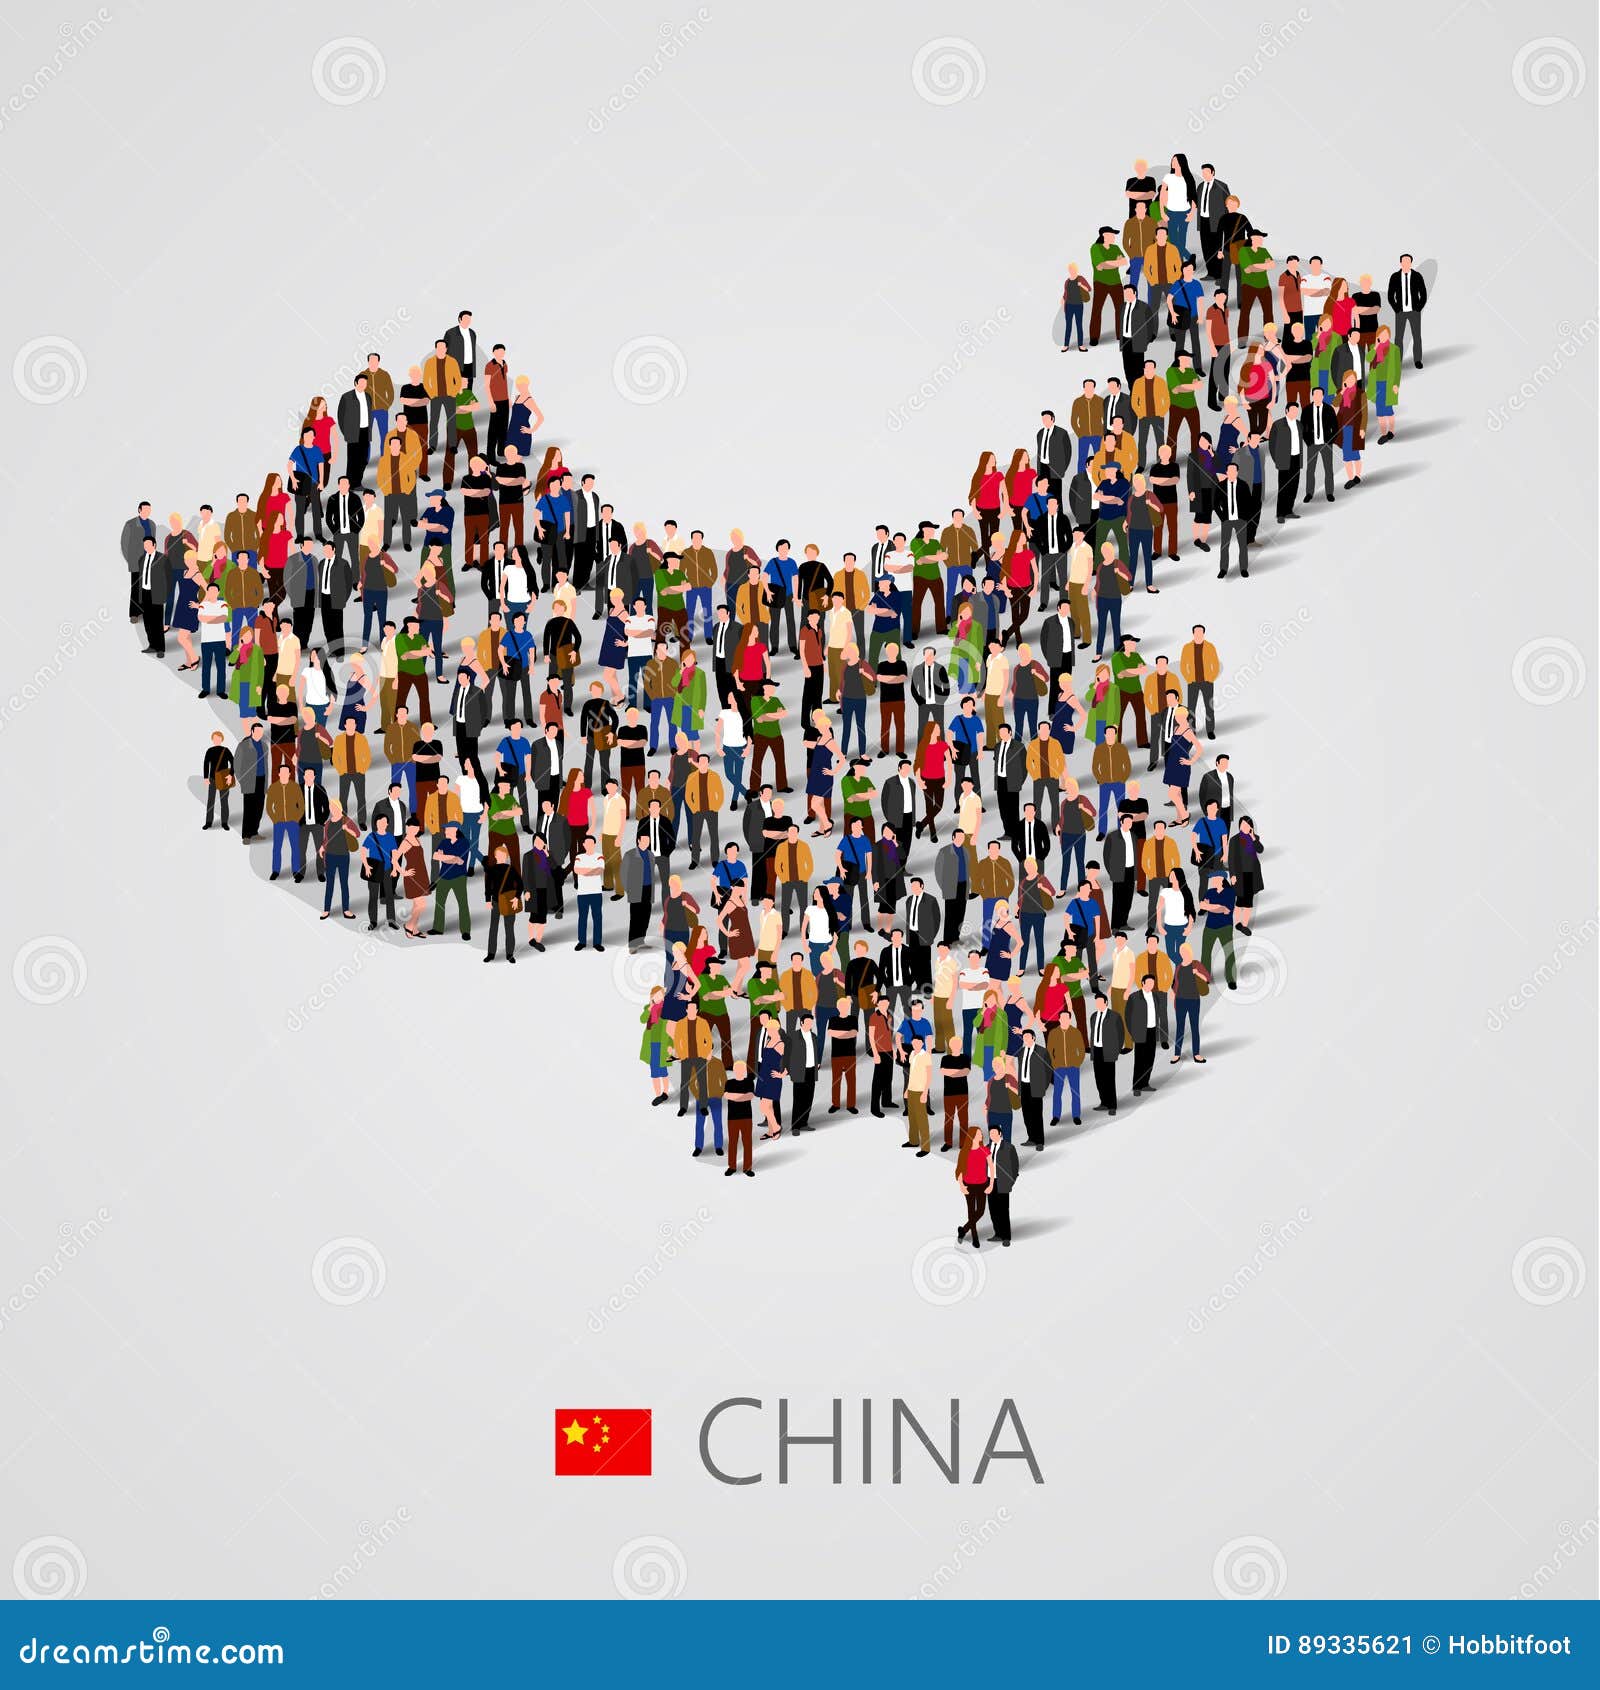 large group of people in china map form. population of china or demographics template.